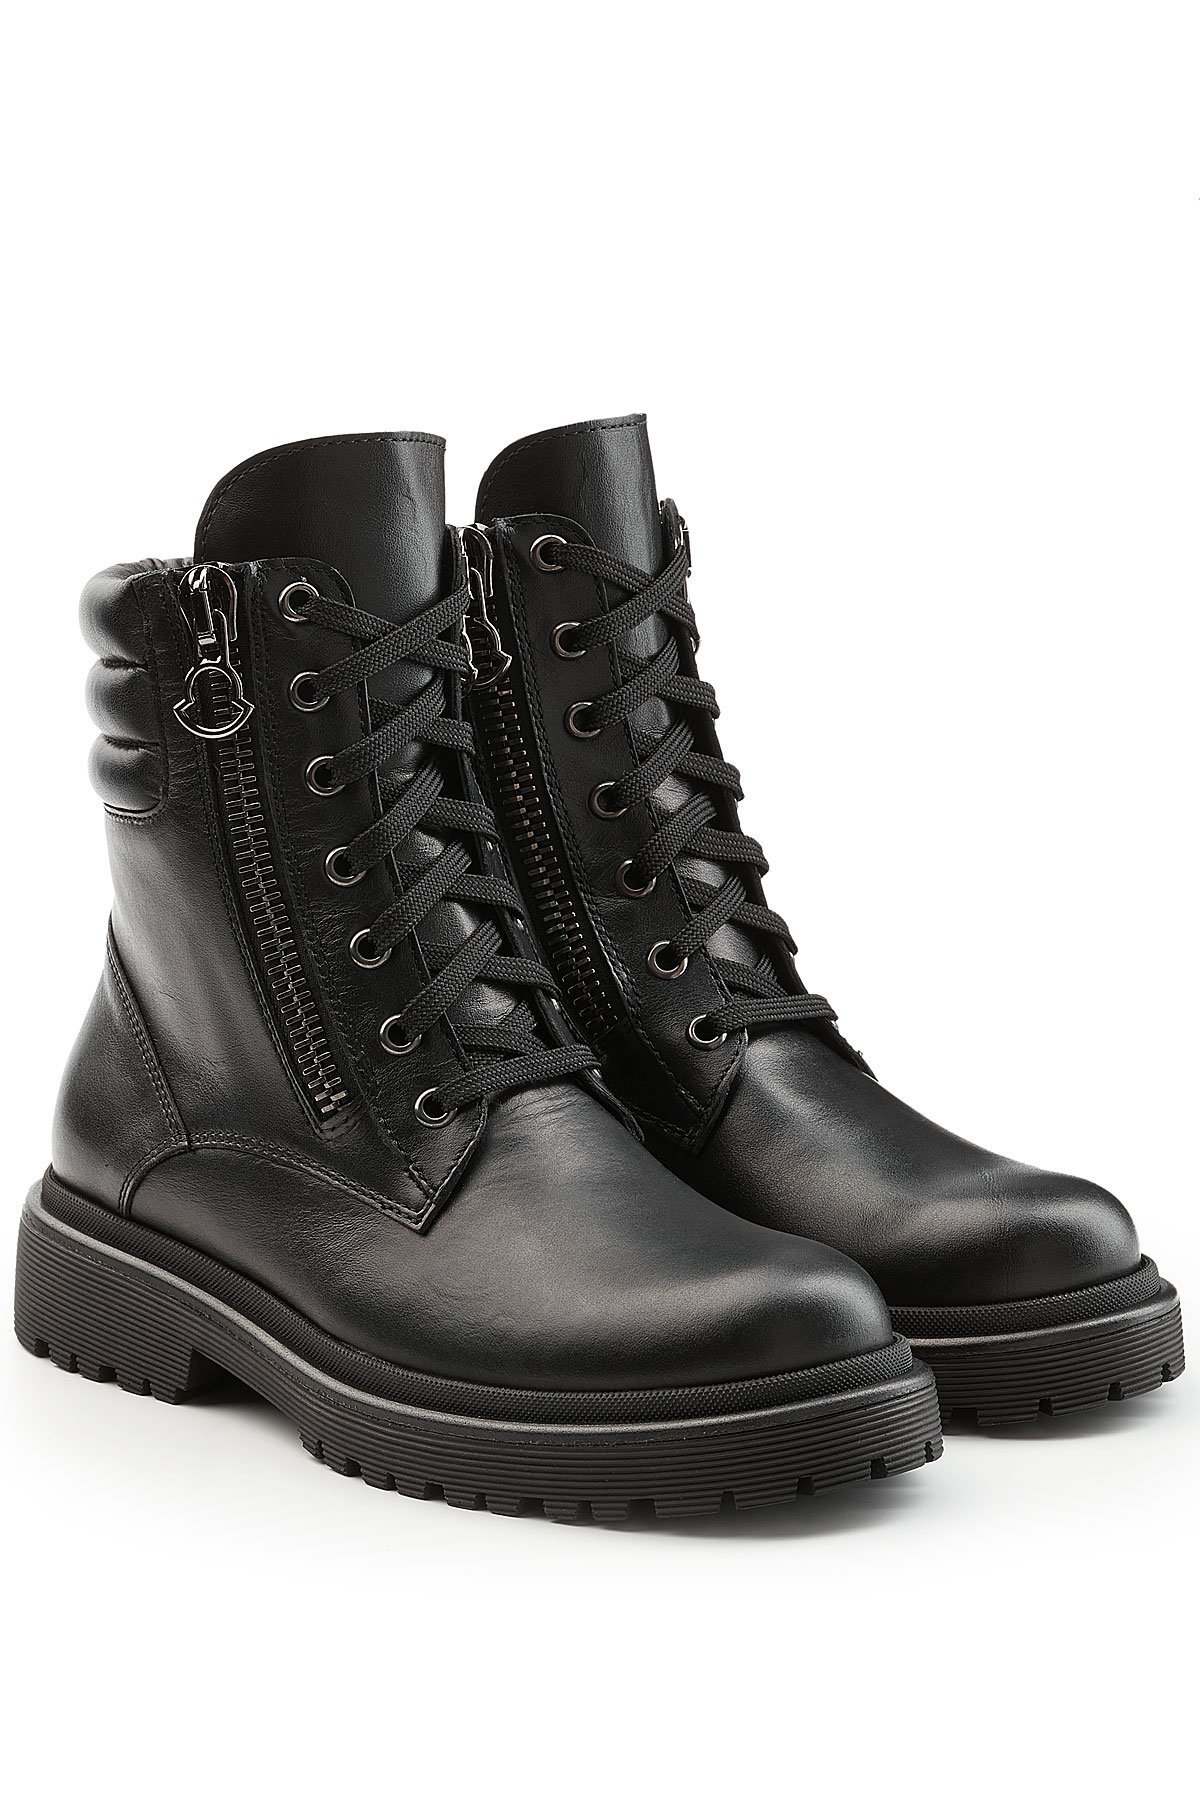 Moncler - New Vivianne Leather Ankle Boots with Shearling